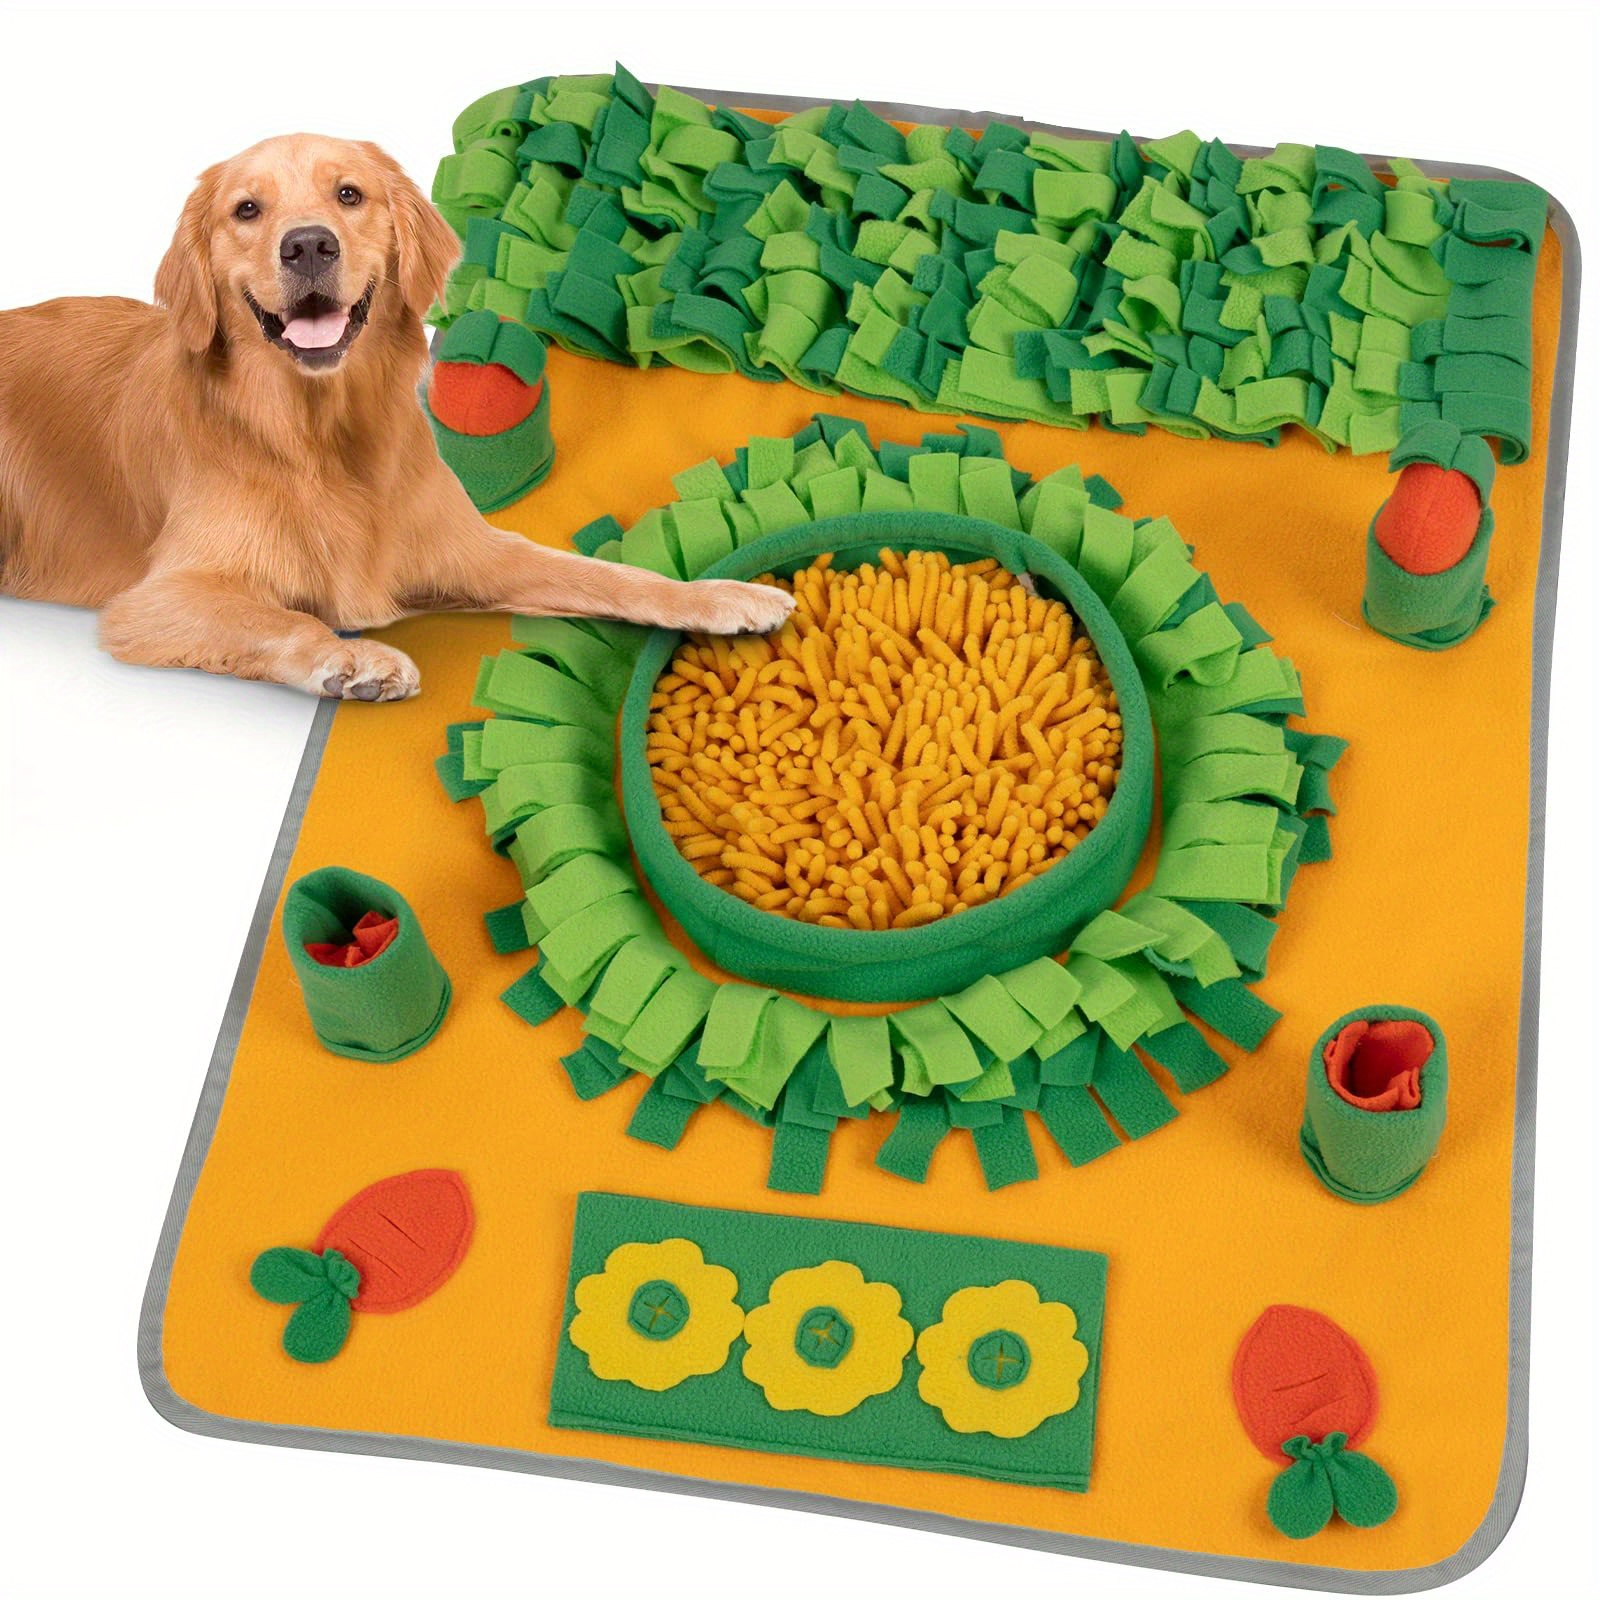 TOMAHAUK Snuffle Mat for Dogs Interactive Feed Game/Dog Puzzle Toy